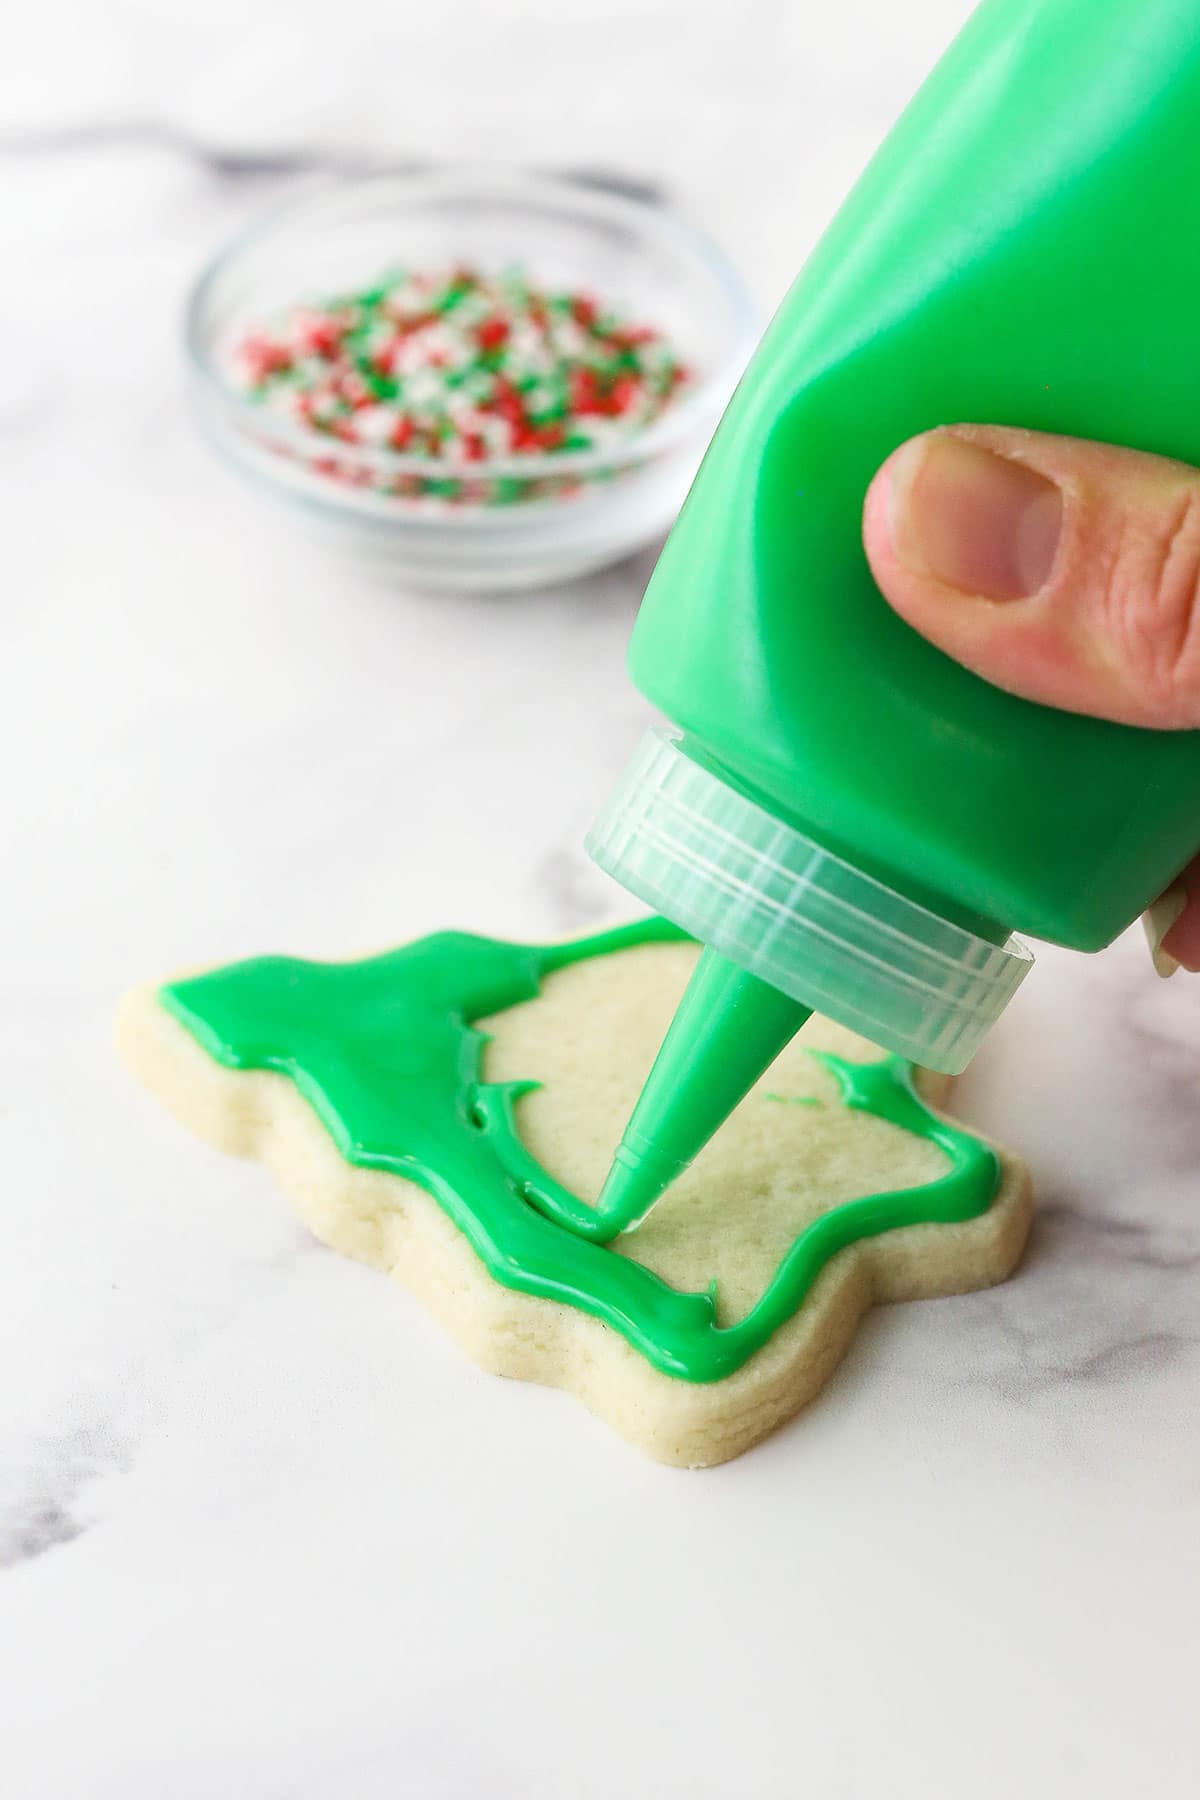 A hand squeezing a bottle of green icing onto a tree-shaped sugar cookie